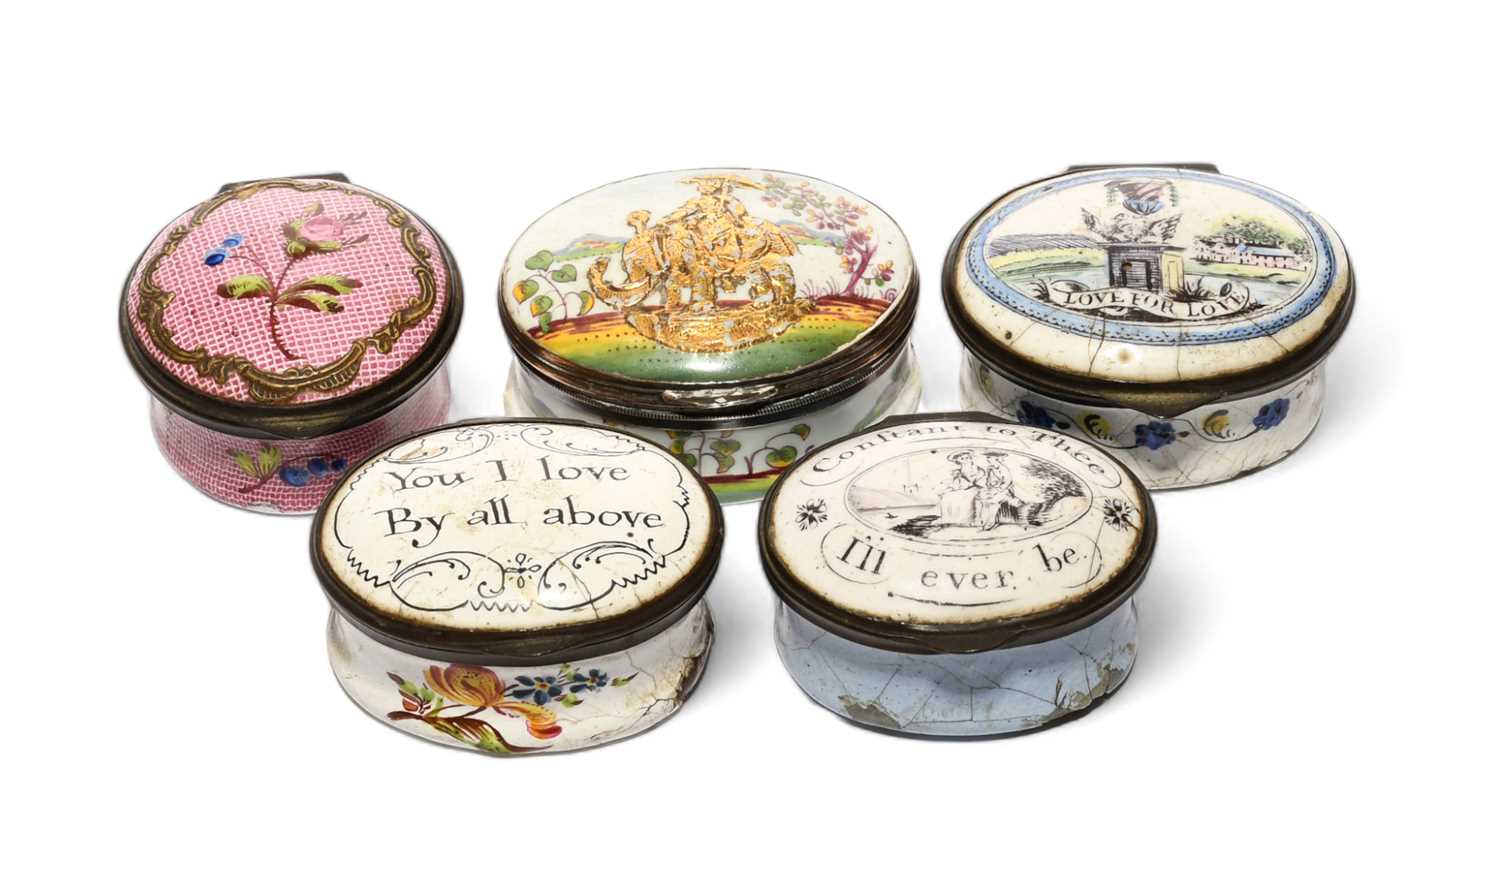 Five enamel patch boxes, 2nd half 18th century, one circular and painted with a rose spray on a dark